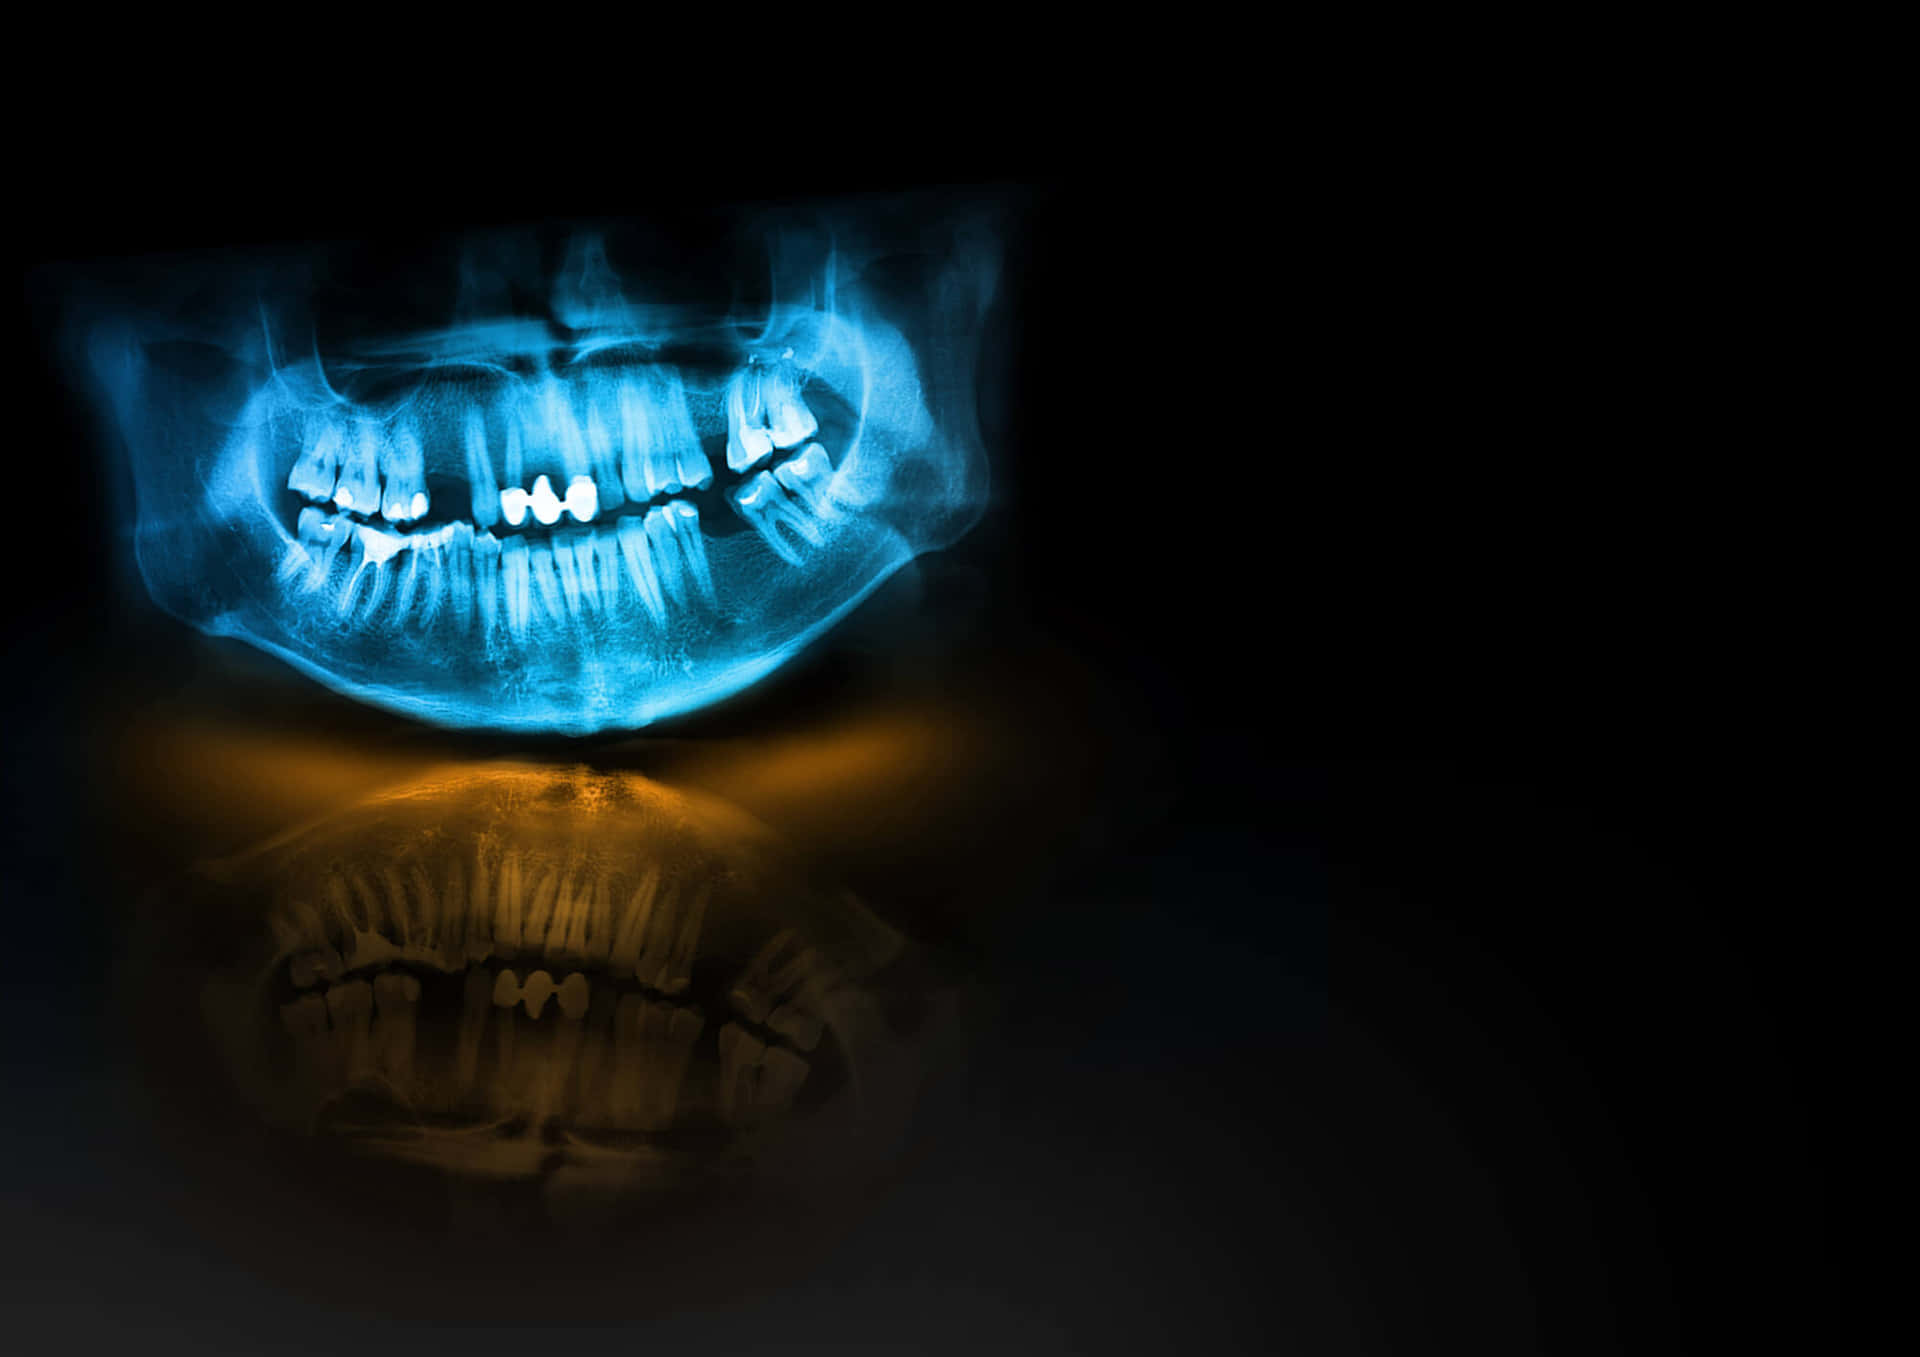 Oral Mouth X-ray Wallpaper